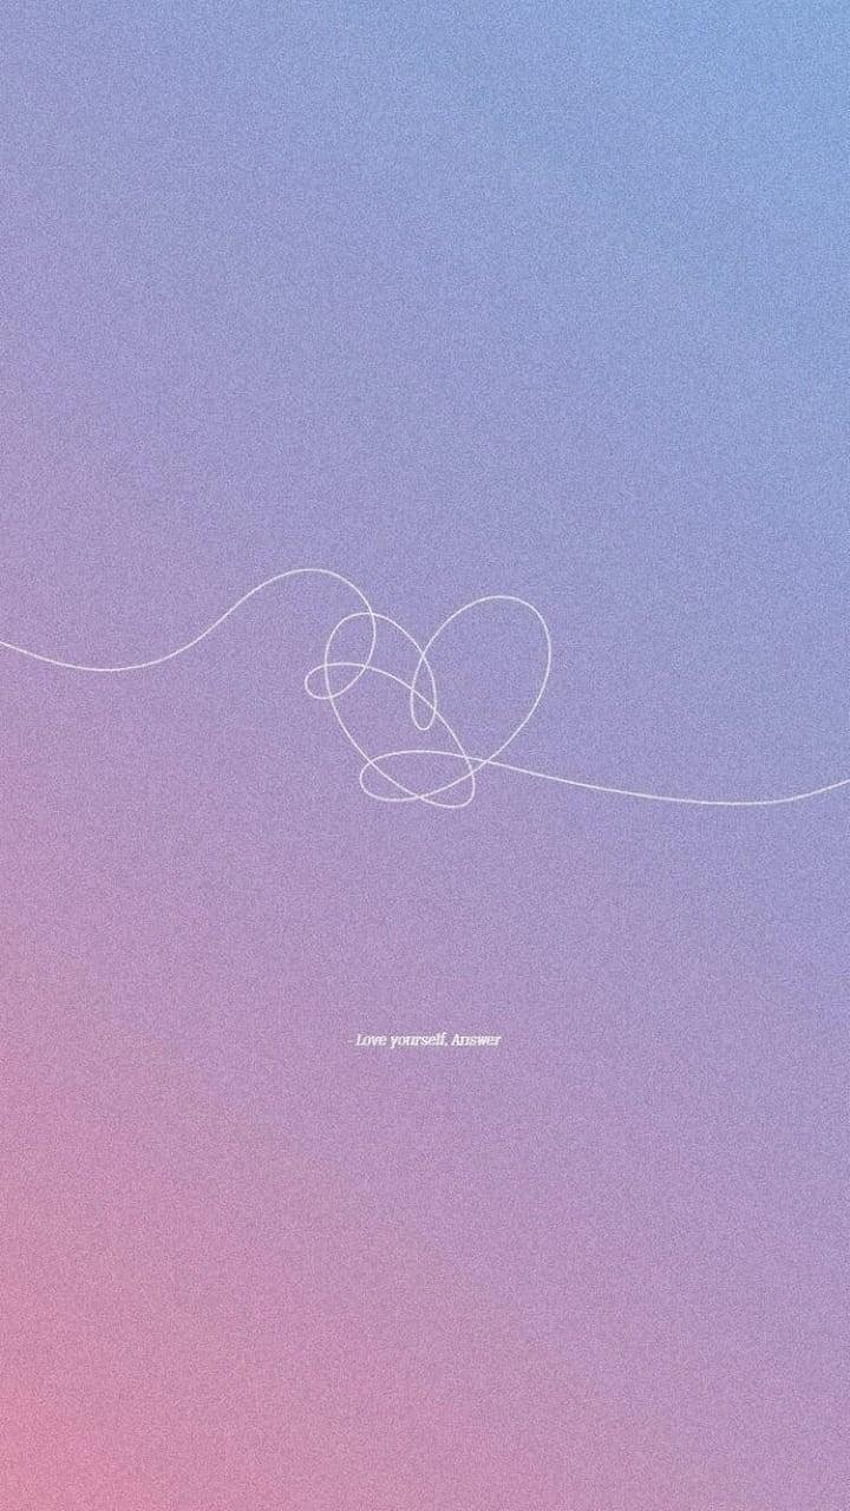 bts discovered by えめ, love yourself answer HD phone wallpaper